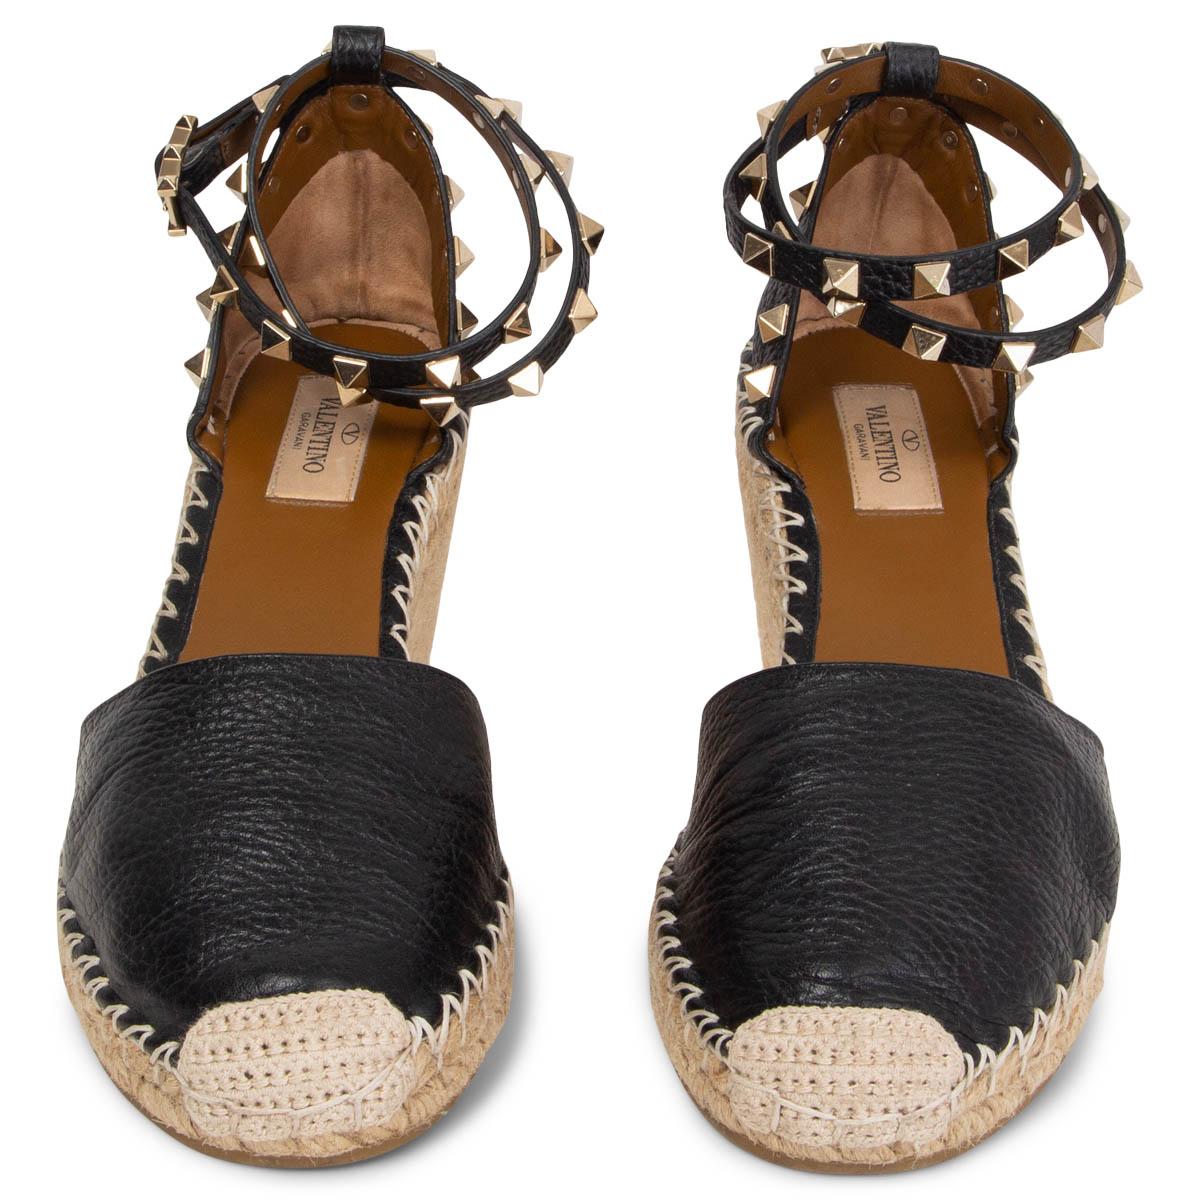 100% authentic Valentino Garavani Rockstud double ankle-strap wedges made from black grained leather upper and a beige raffia sole featuring gold-tone Rockstud detailing. Have been worn and are in excellent condition. 

Measurements
Imprinted